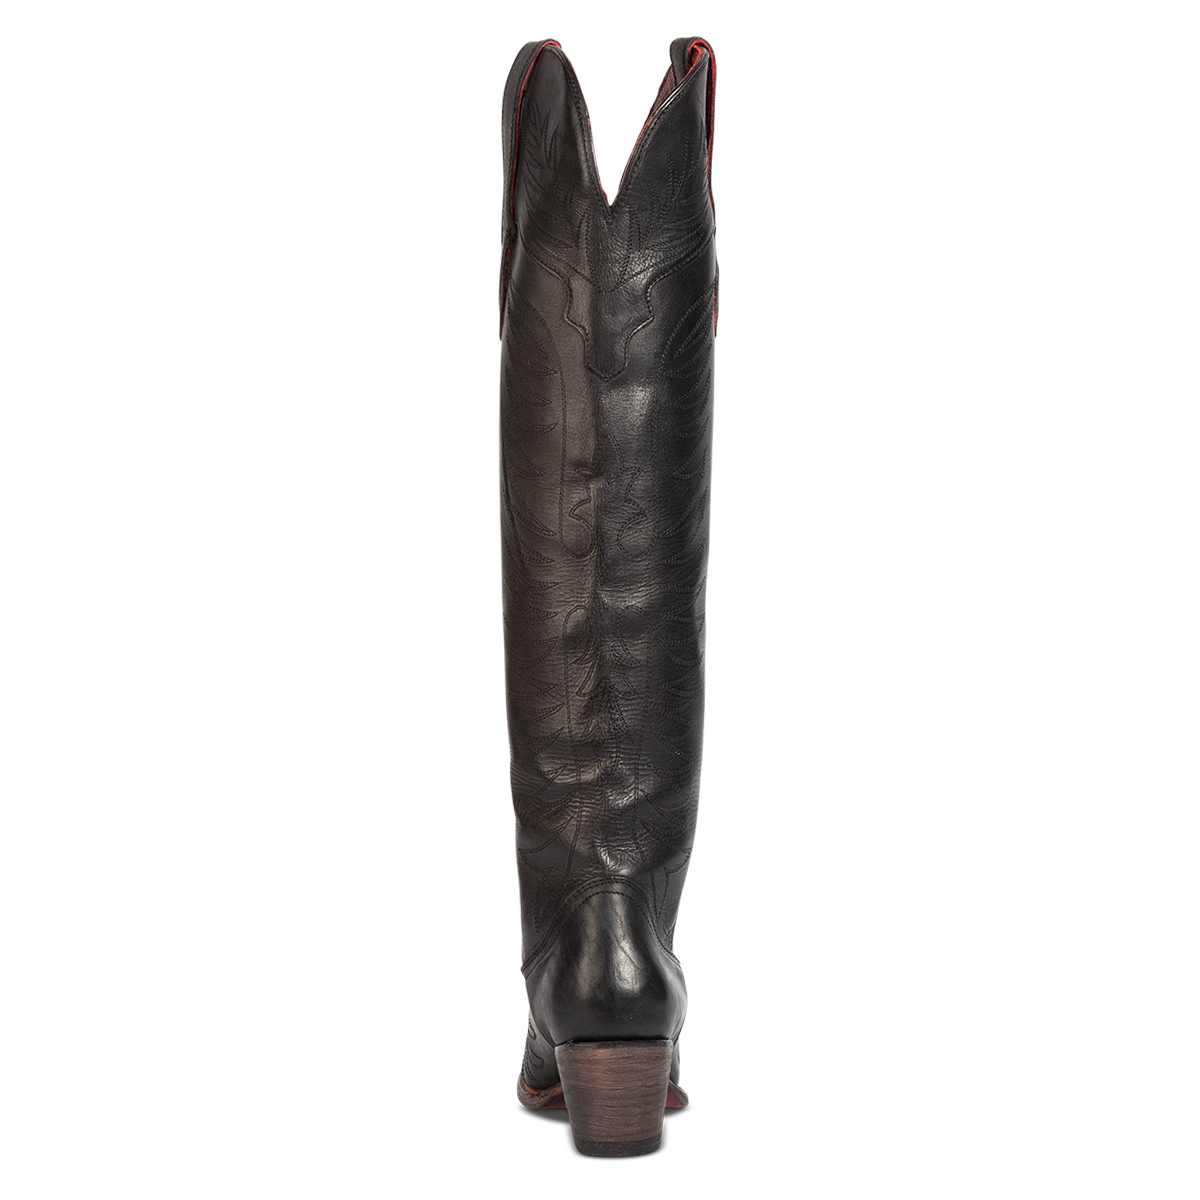 Back view showing v-dip and heel with western stitch detailing on FREEBIRD women's Misty black leather tall western boot